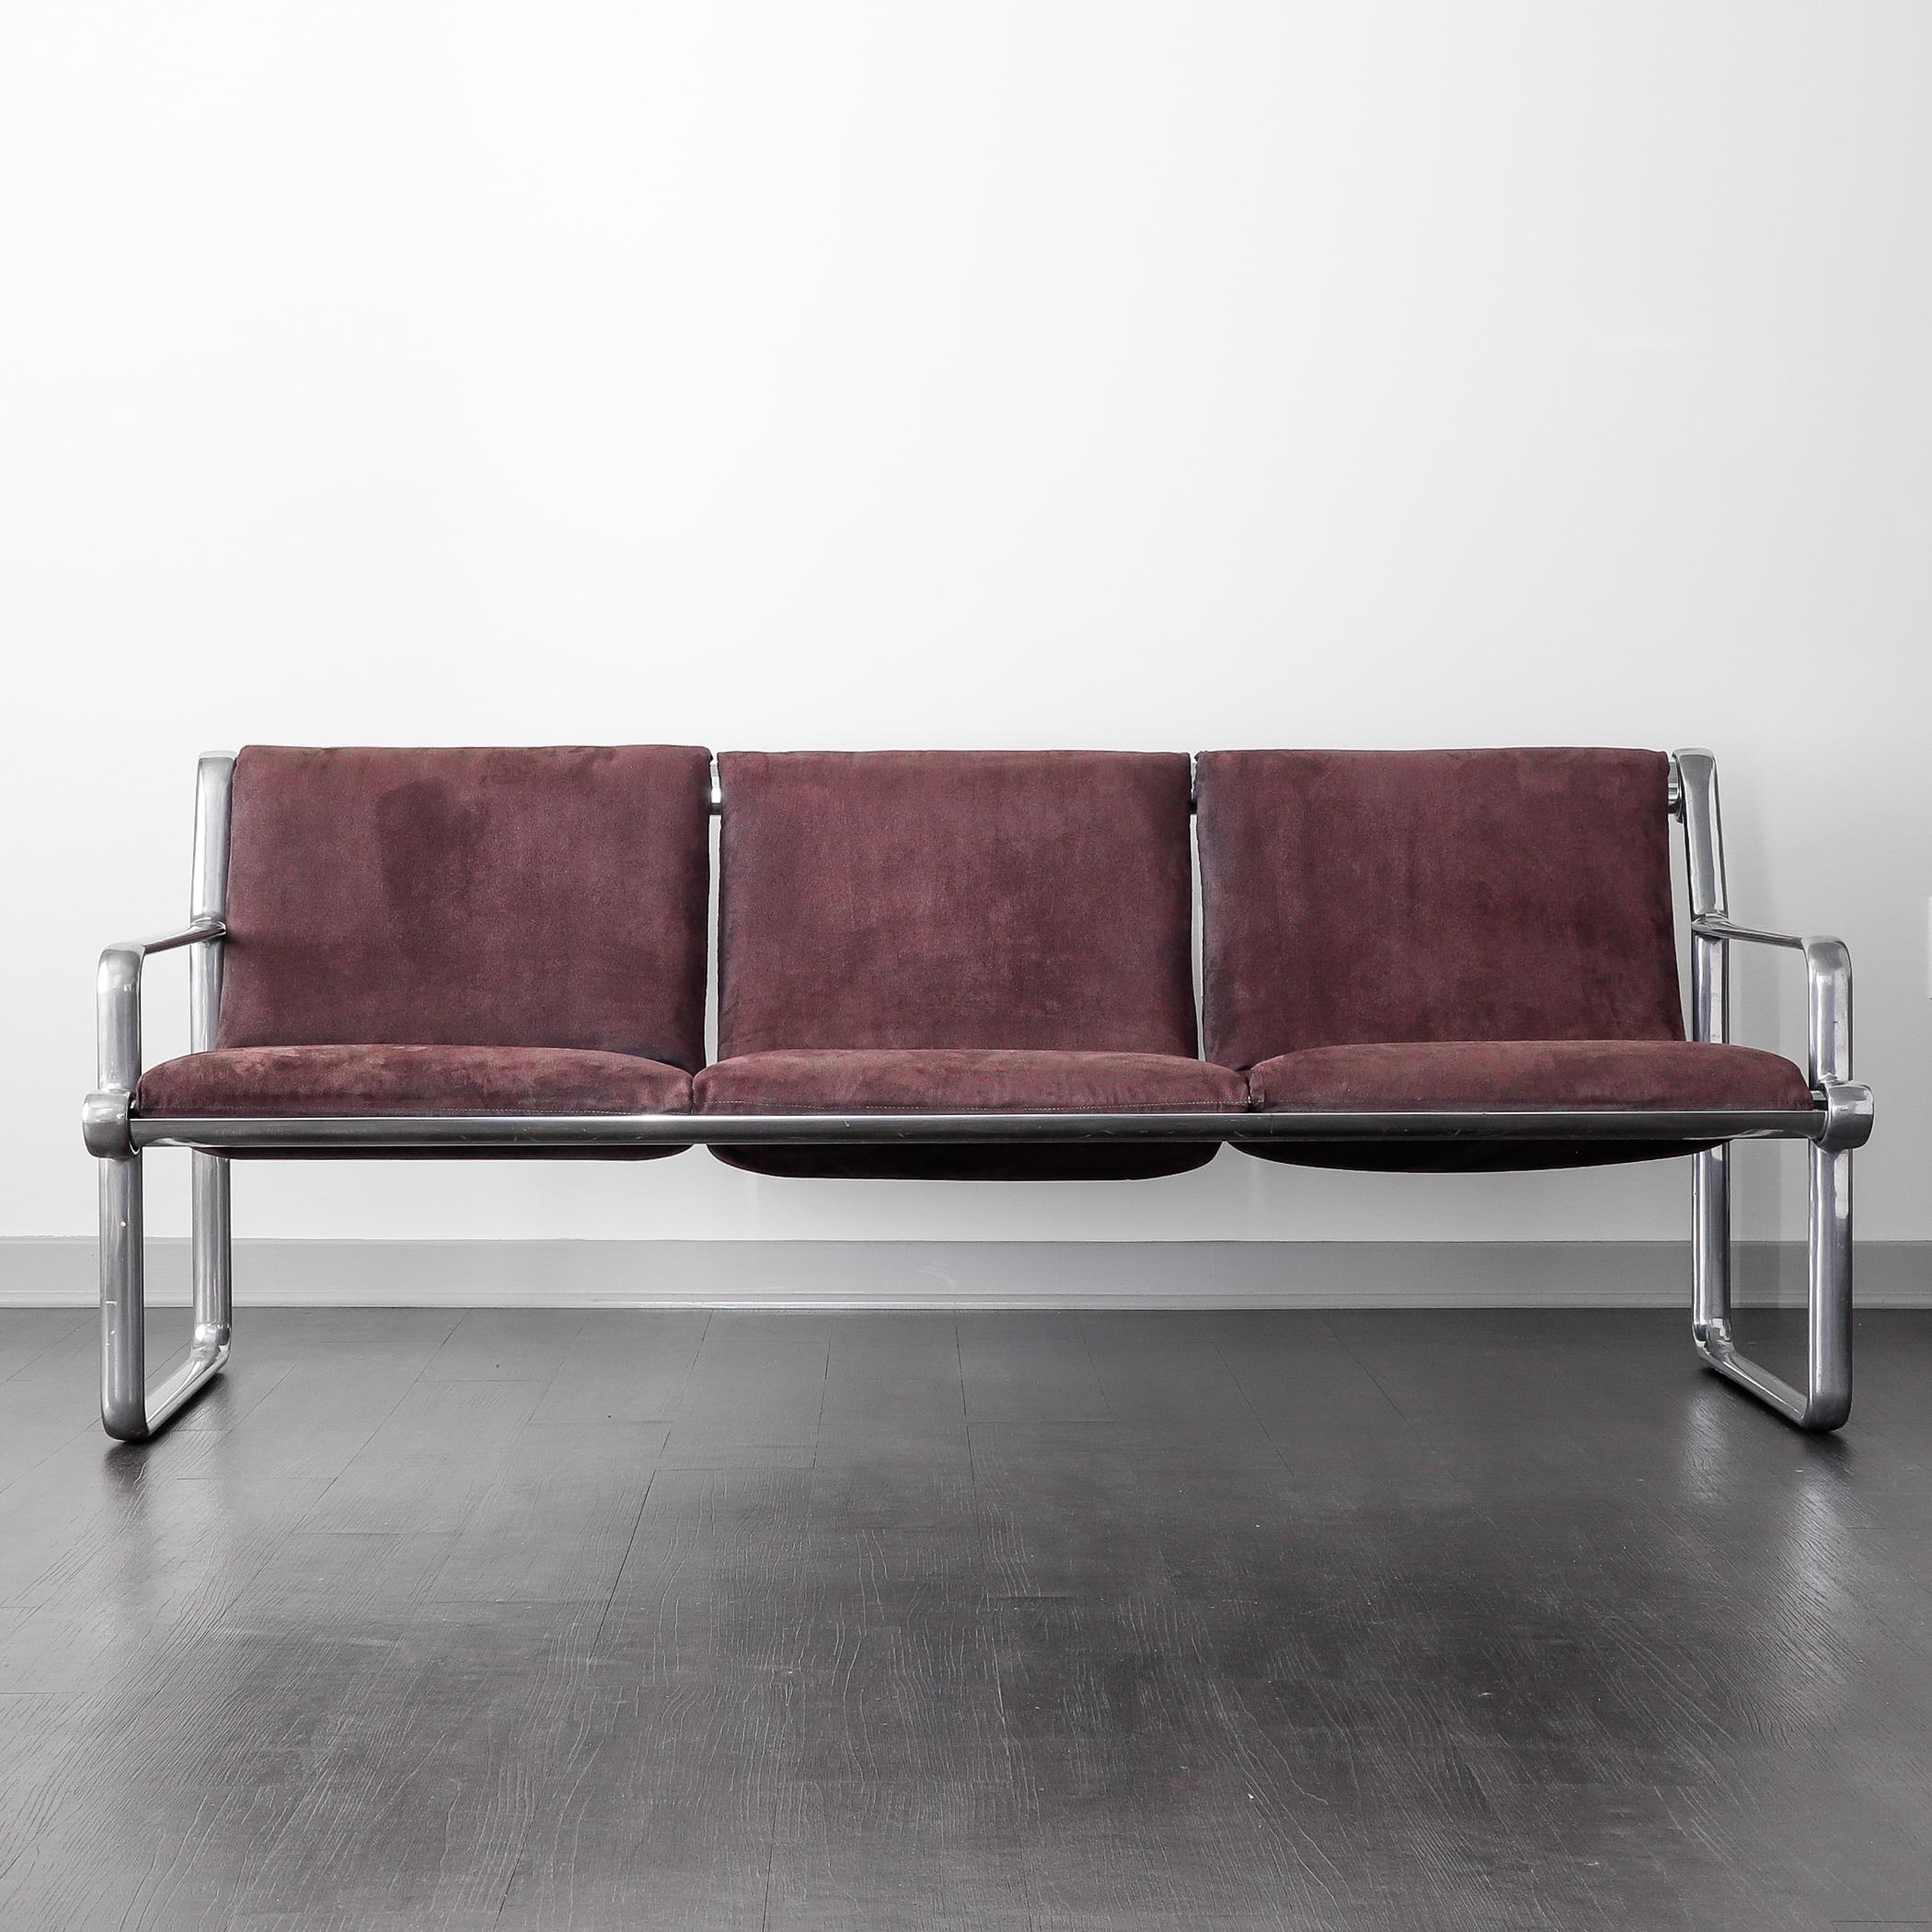 Open arm three-seat sofa with purple microsuede upholstery designed by Bruce Hannah and Andrew Morrison for Knoll in 1971. The design team worked together at Knoll throughout the 1970s and won numerous design awards. 

Like Marc Newson's Lockheed